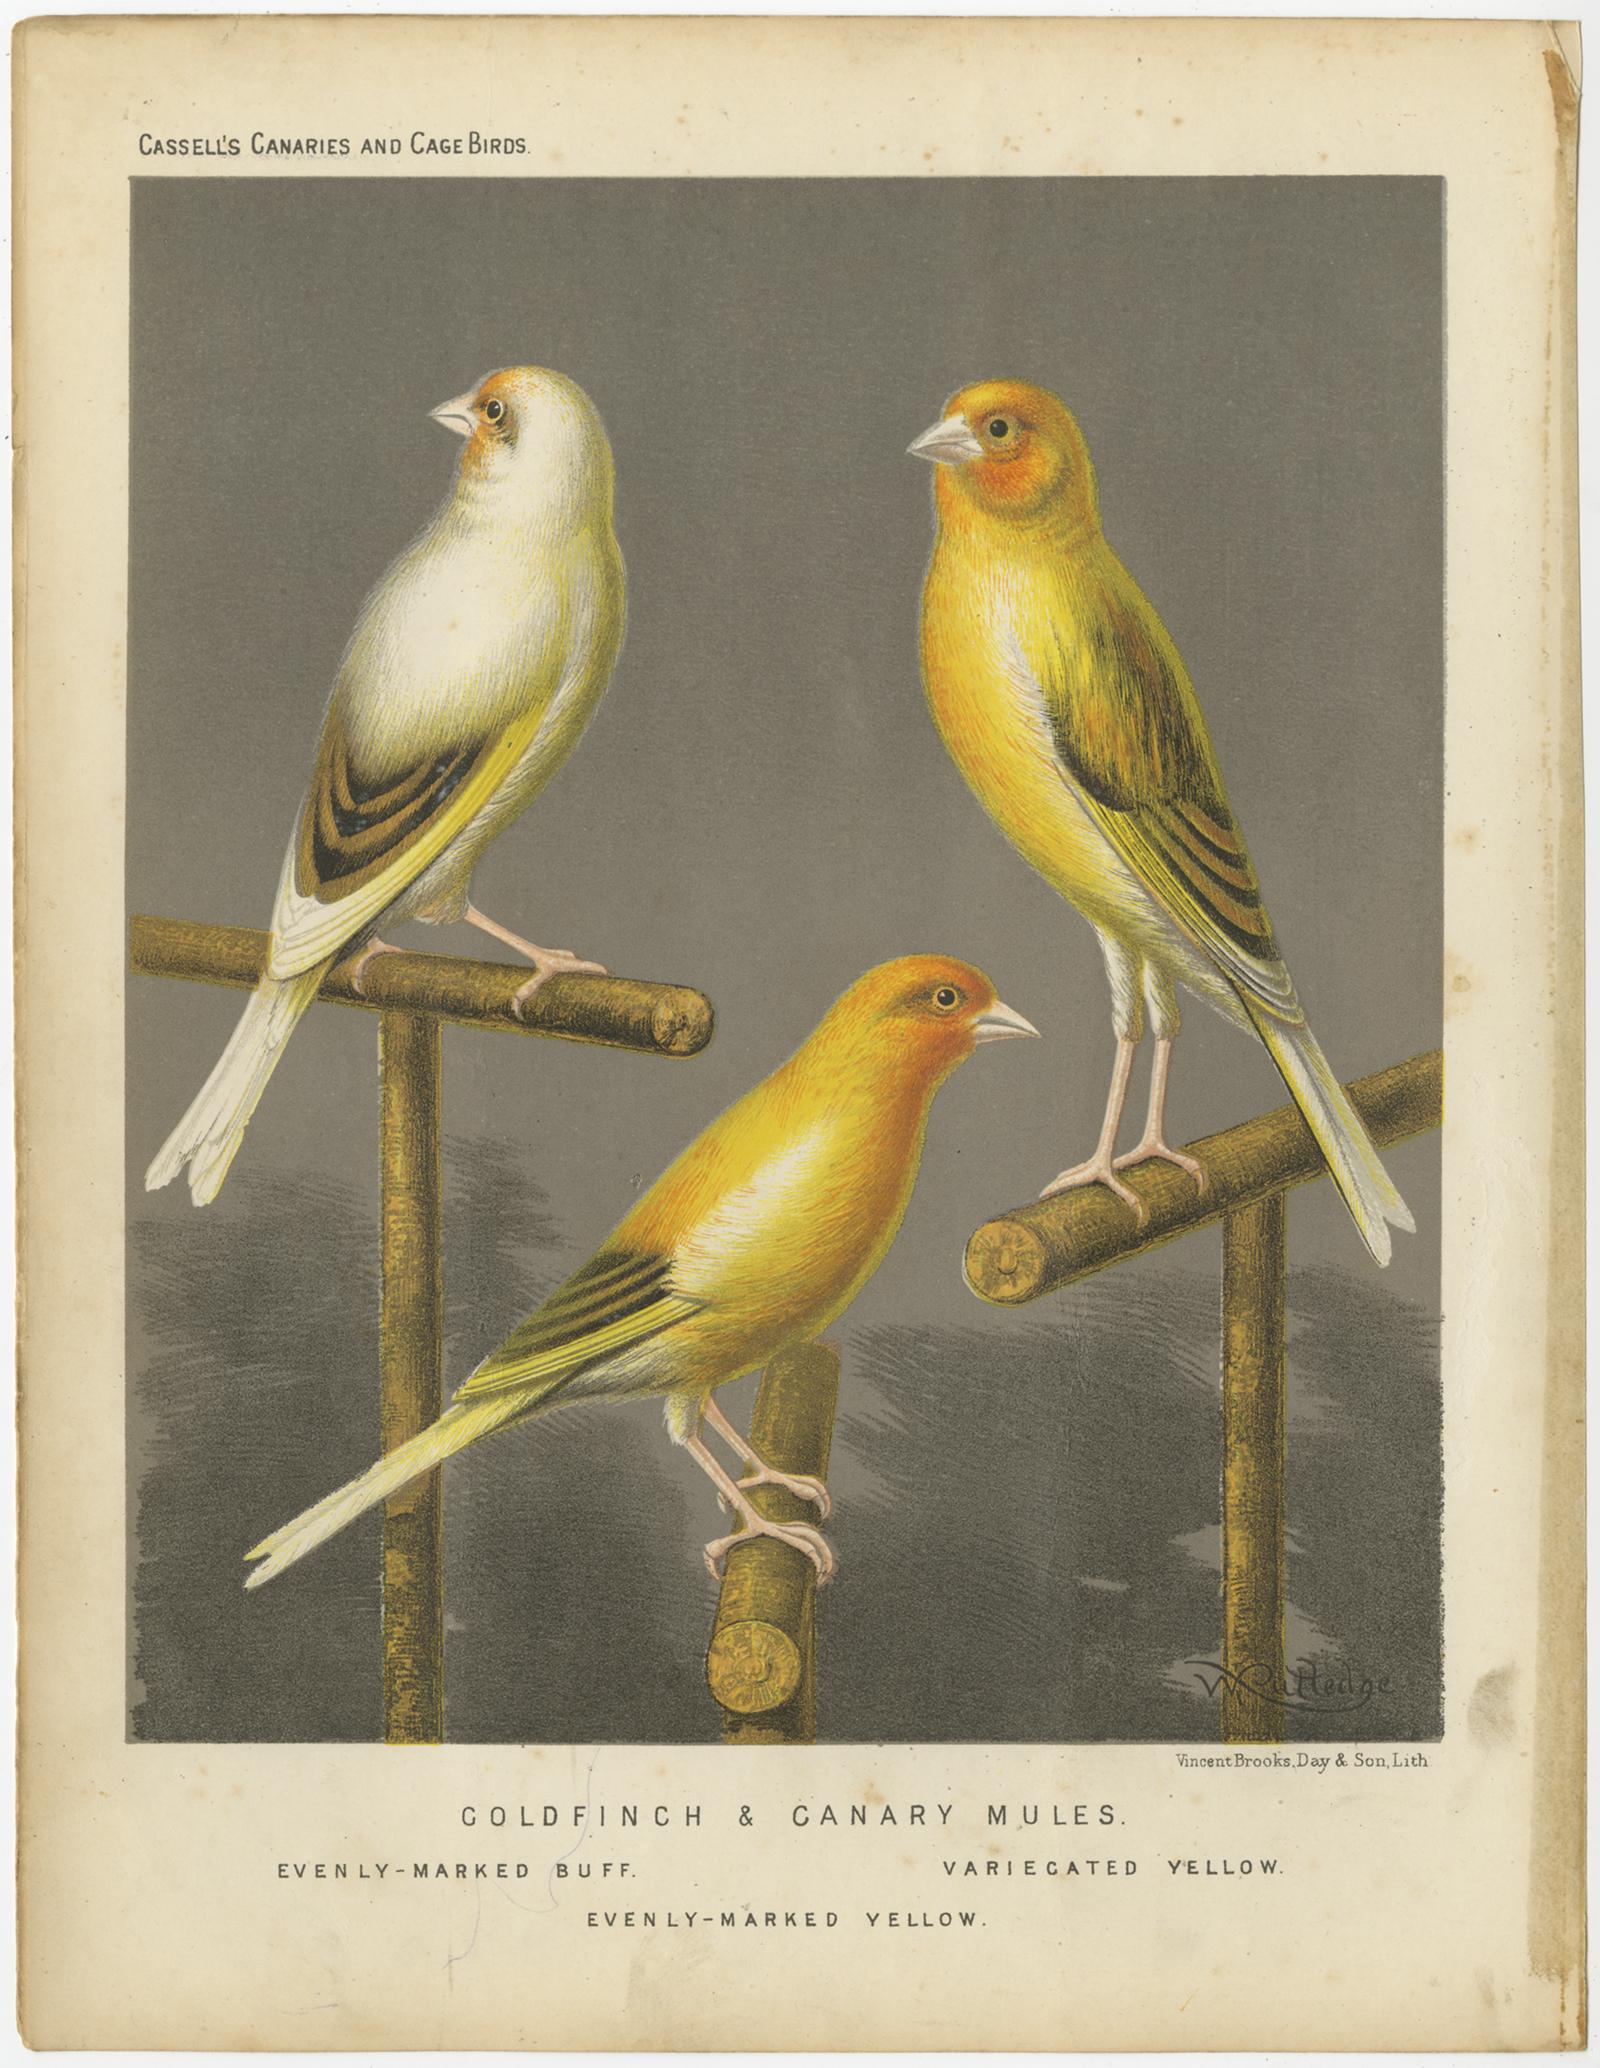 Antique bird print titled 'Gold Finch & Canary Mules 1. Evenly-Marked Buff 2. Variecated Yellow 3. Evenly-Marked Yellow' Old bird print depicting the Evenly-Marked Buff, Variecated Yellow, Evenly-Marked Yellow'. This print originates from: